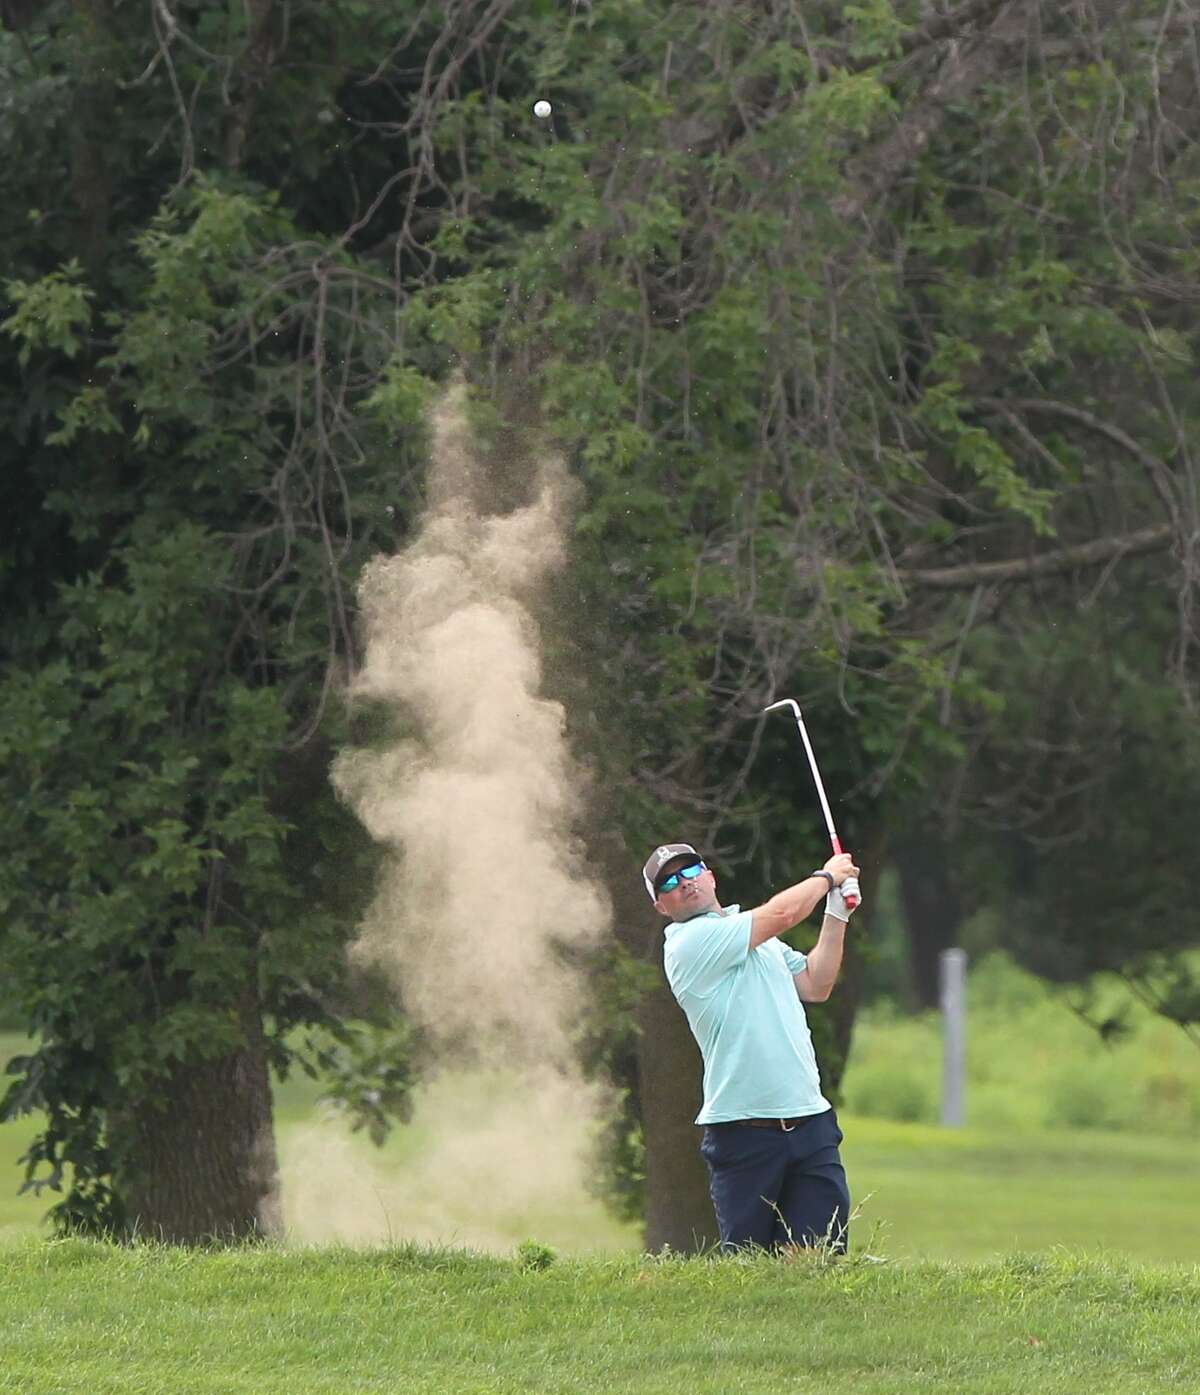 A golfer kicks up a little dust as he blasts out of a sand trap during a recent round at The Links Golf Course.